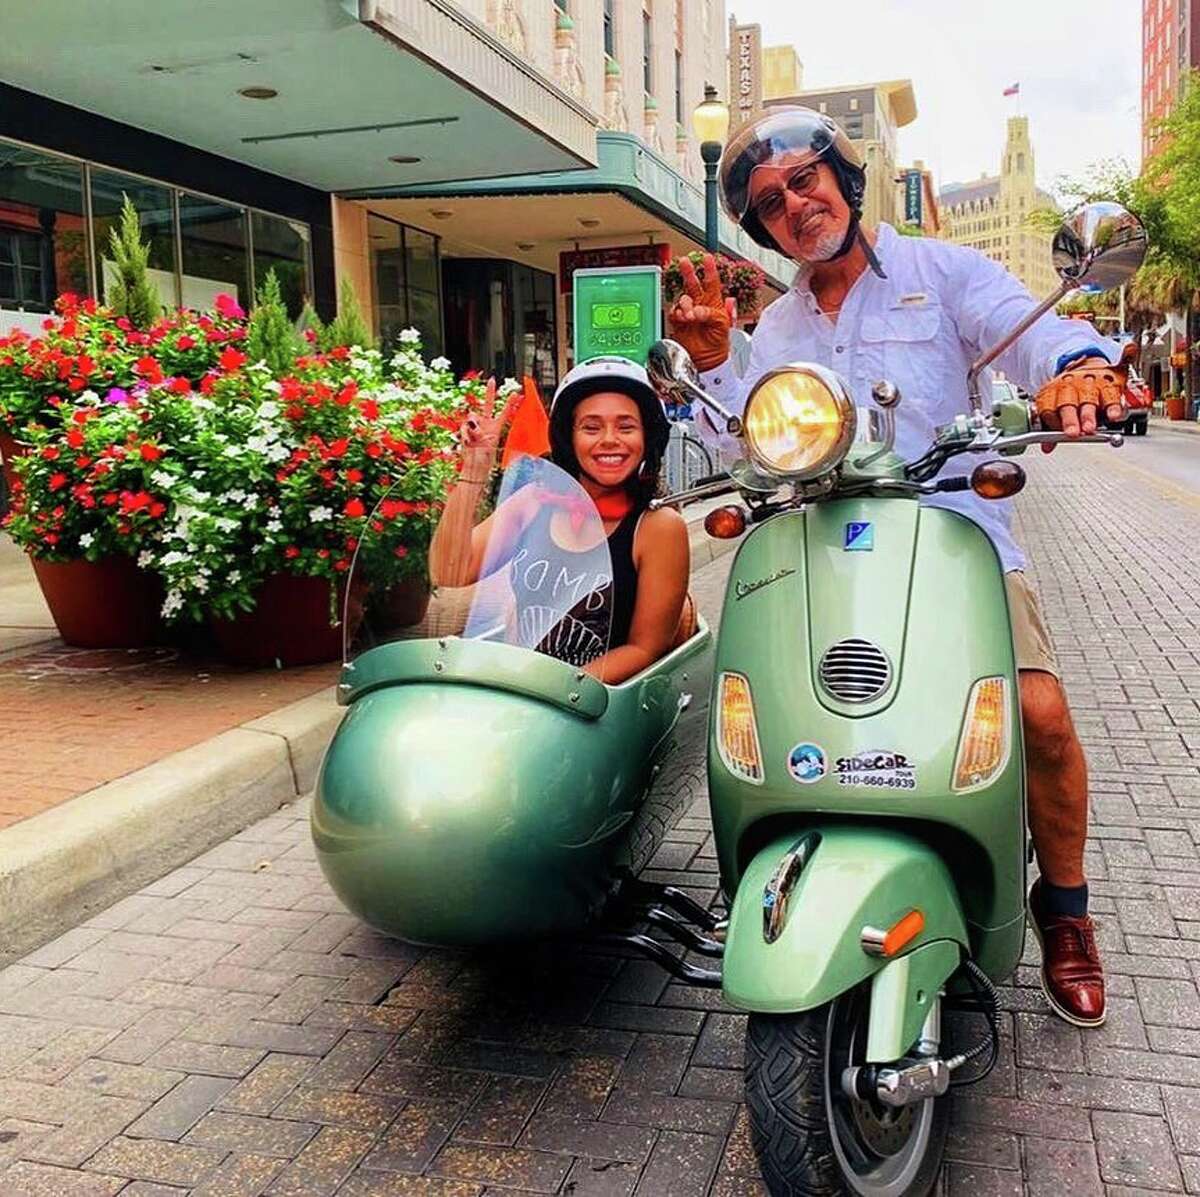 San Antonio Sidecar Tours hit the streets in July, taking residents and visitors coming in from as far as Kuwait around some of the city's must-sees via a seat in a sidecar attached to a Vespa.